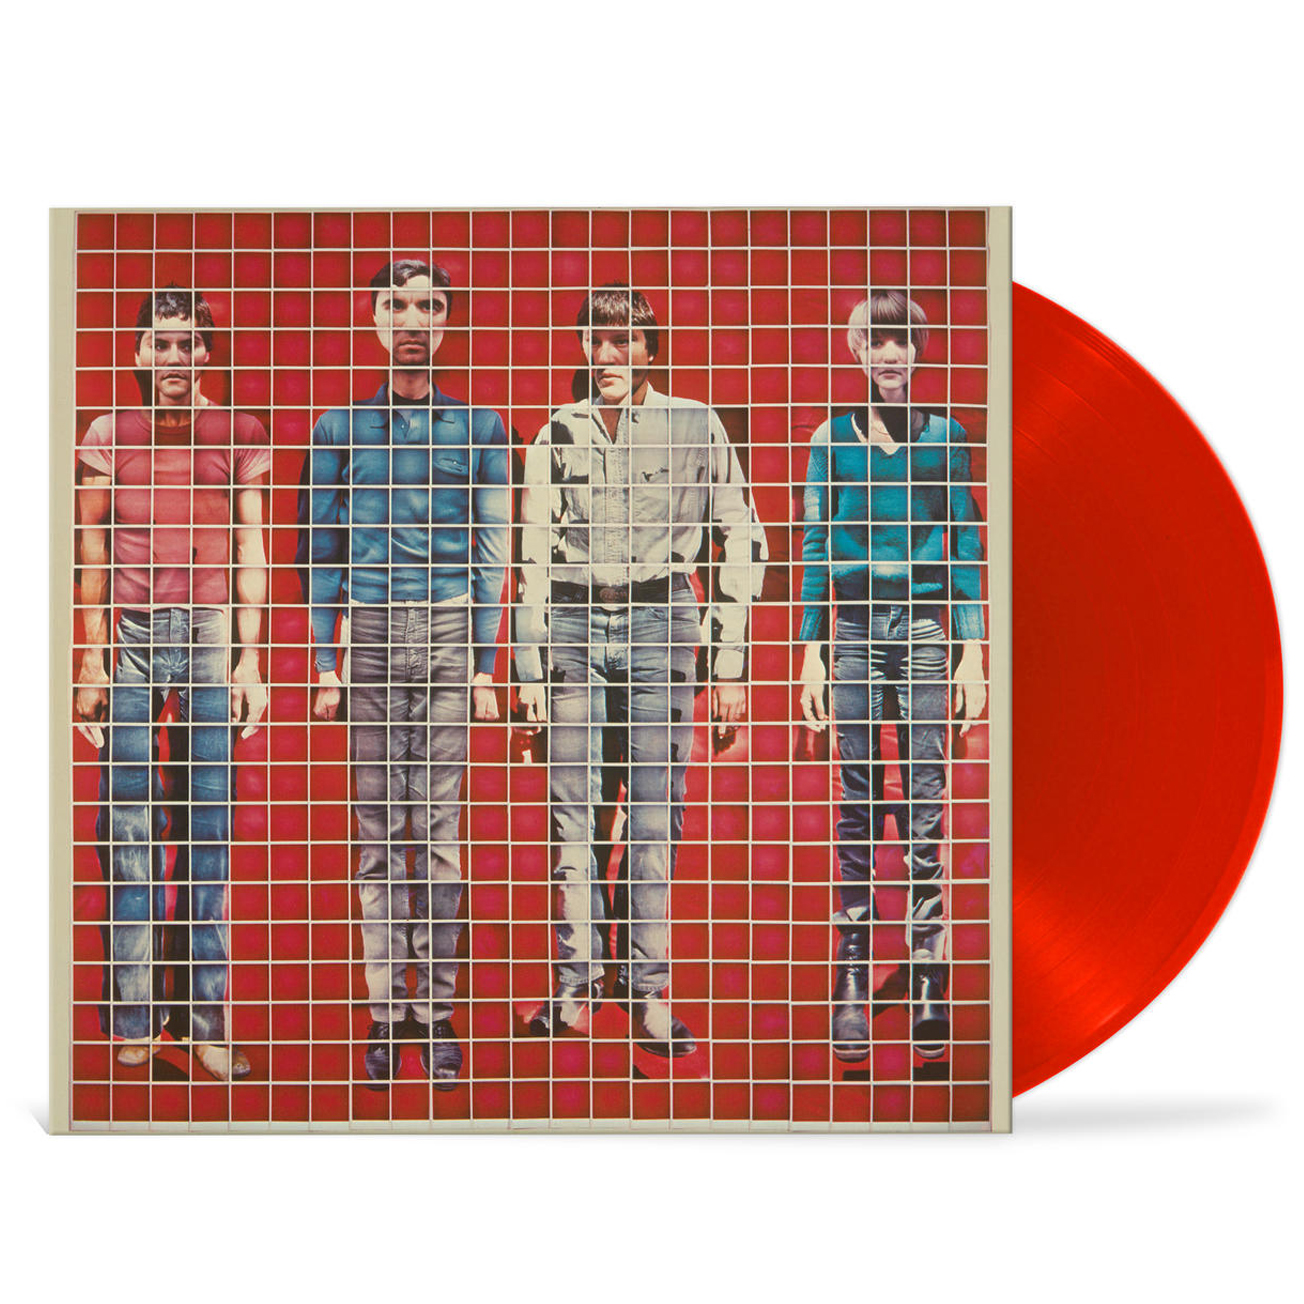 Talking Heads - More Songs About Buildings And Food (Ltd. Rocktober)(Red Vinyl) 